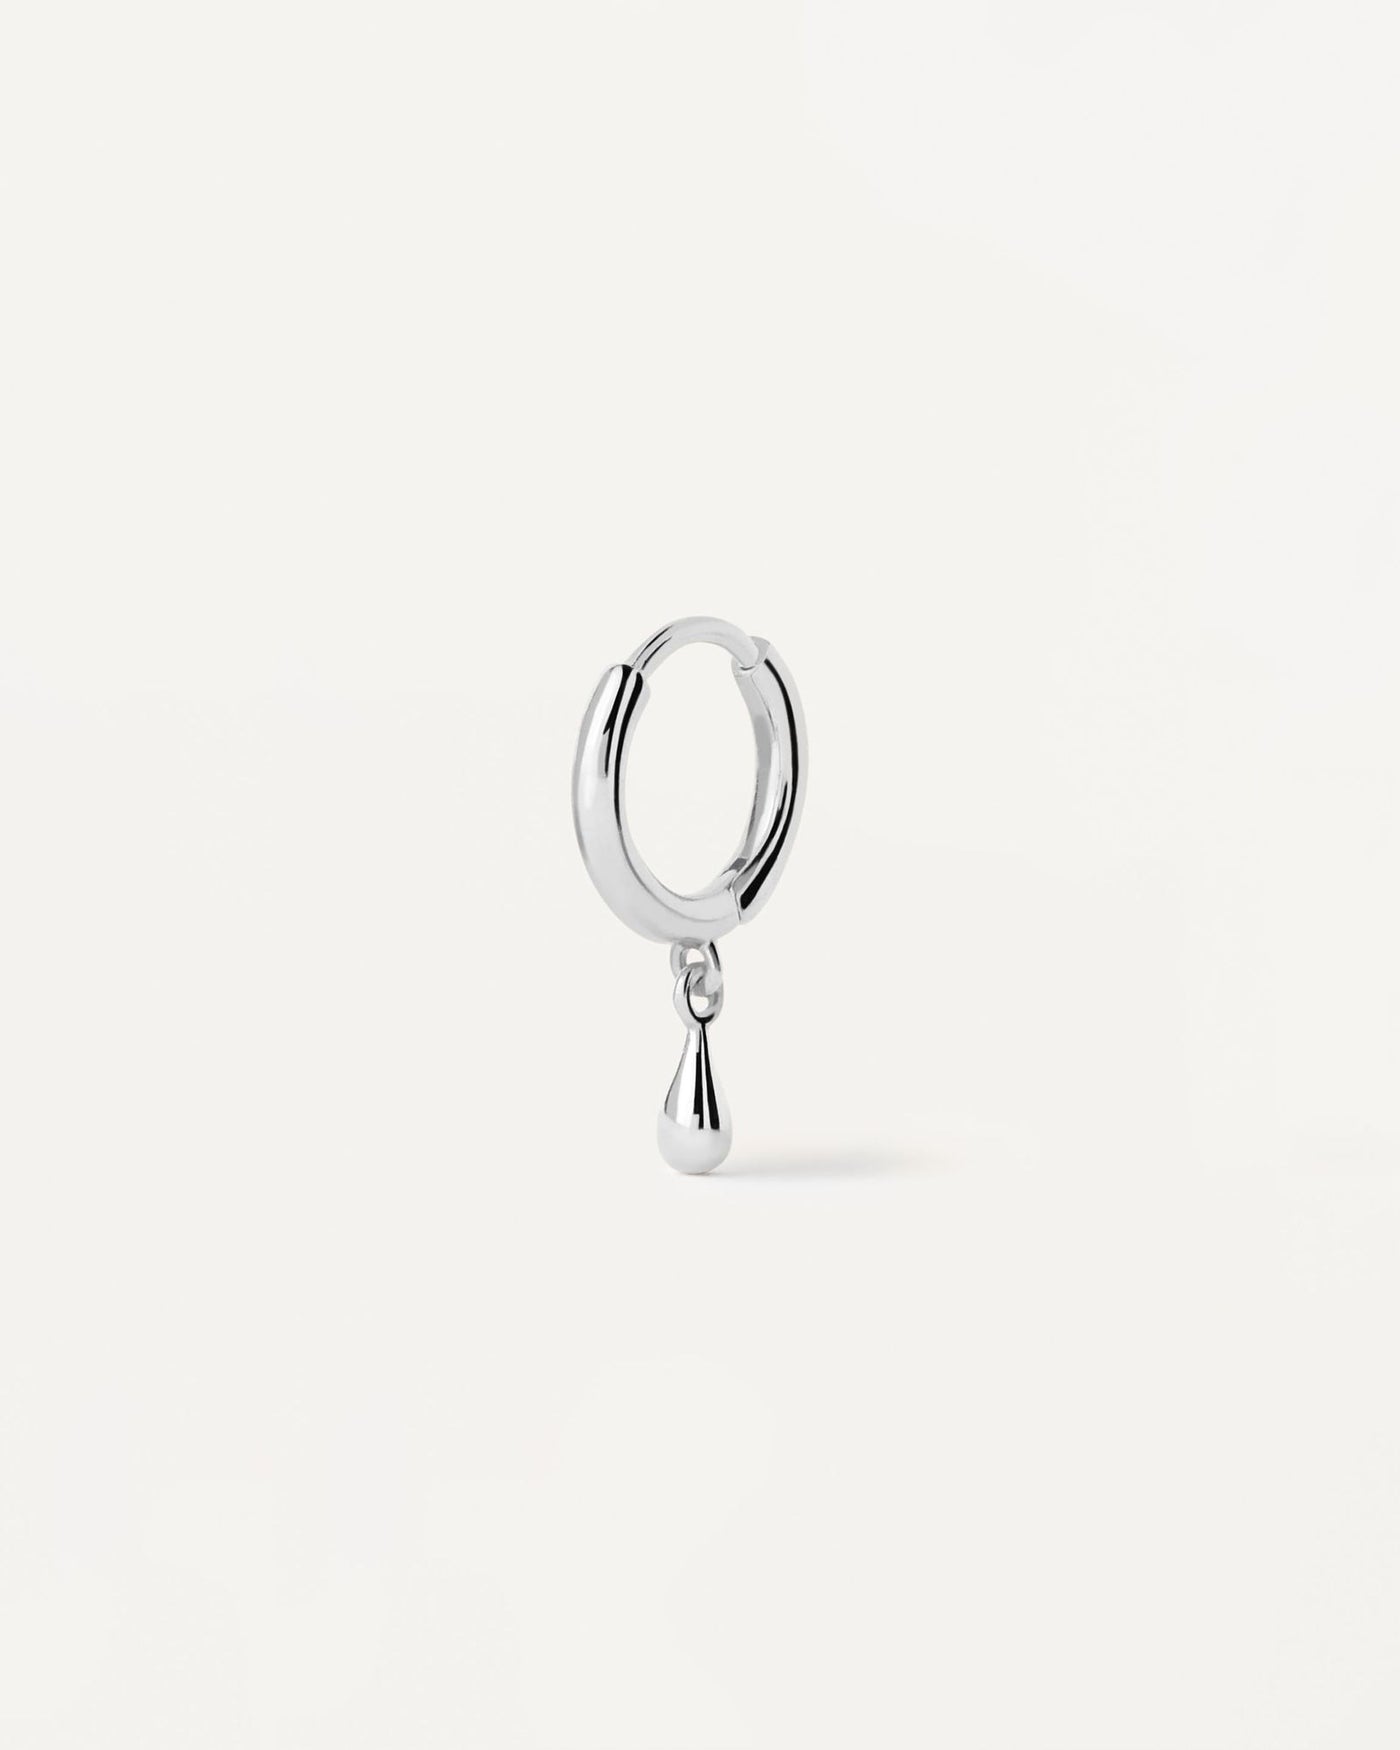 2024 Selection | Teardrop silver single hoop Earring. Sterling silver ear piercing with small drop pendant. Get the latest arrival from PDPAOLA. Place your order safely and get this Best Seller. Free Shipping.